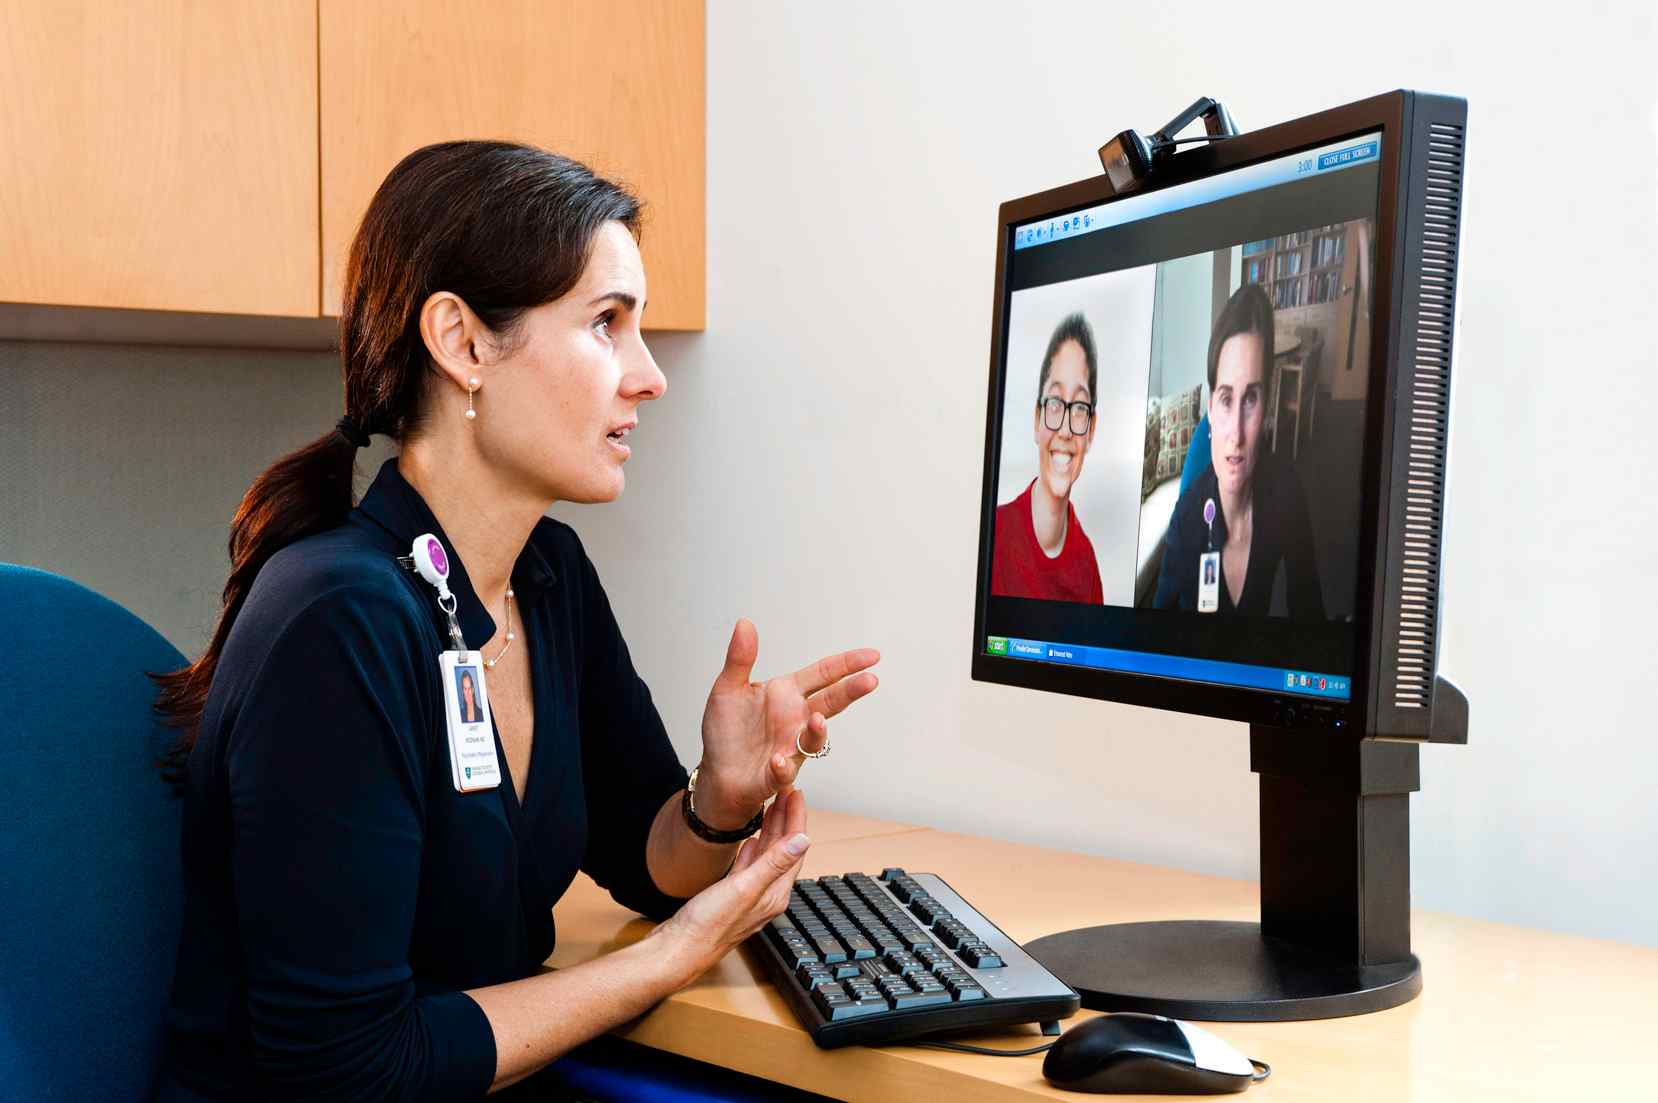 Lessons Learned From Telemedicine During COVID-19 and How Organizations Can Scale and Adapt